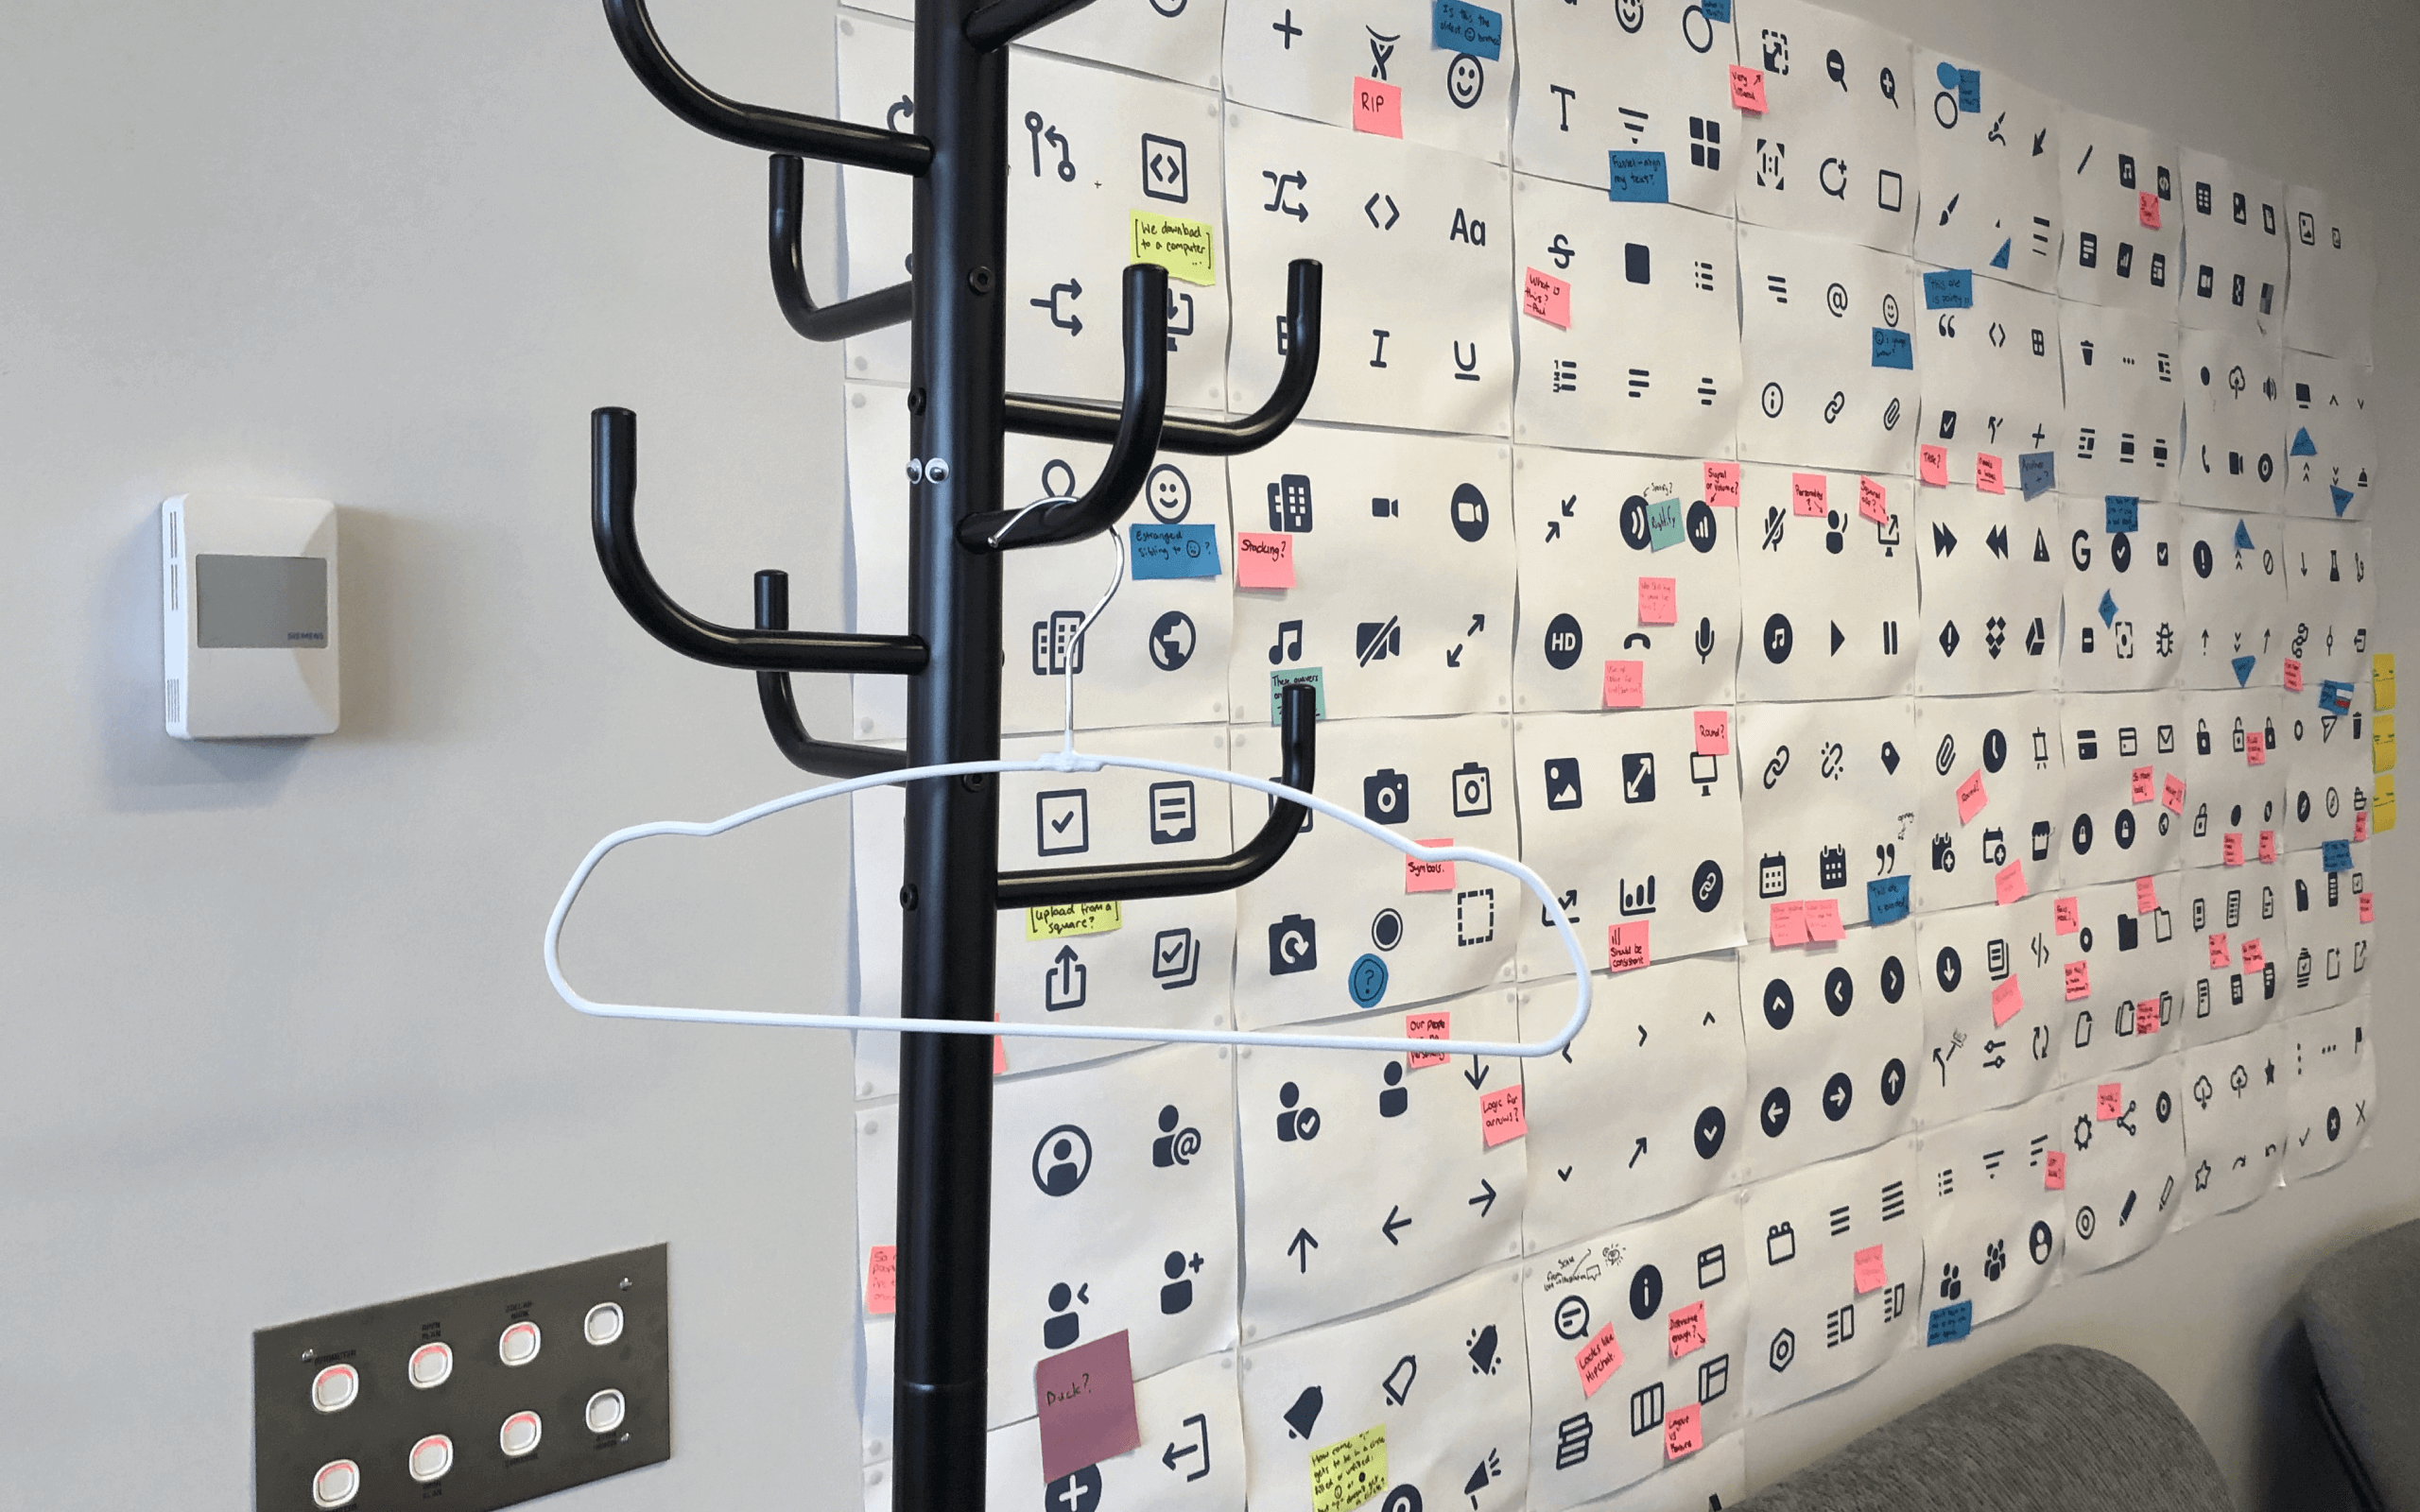 Our longstanding wall of visual feedback for icons